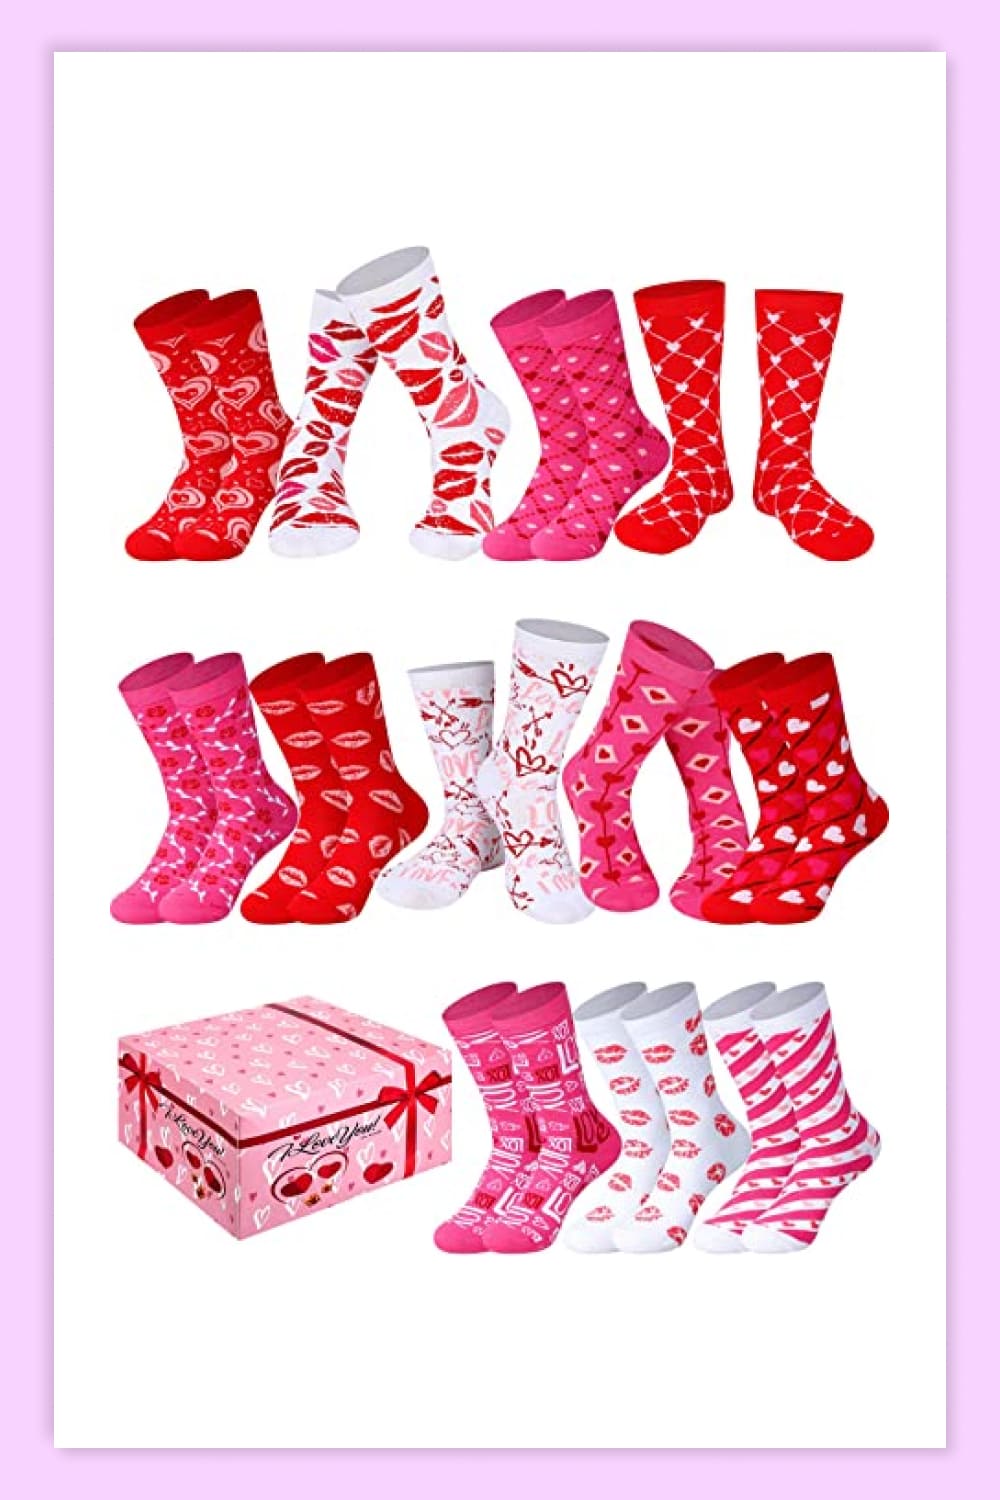 Collage of images of pink and white socks.